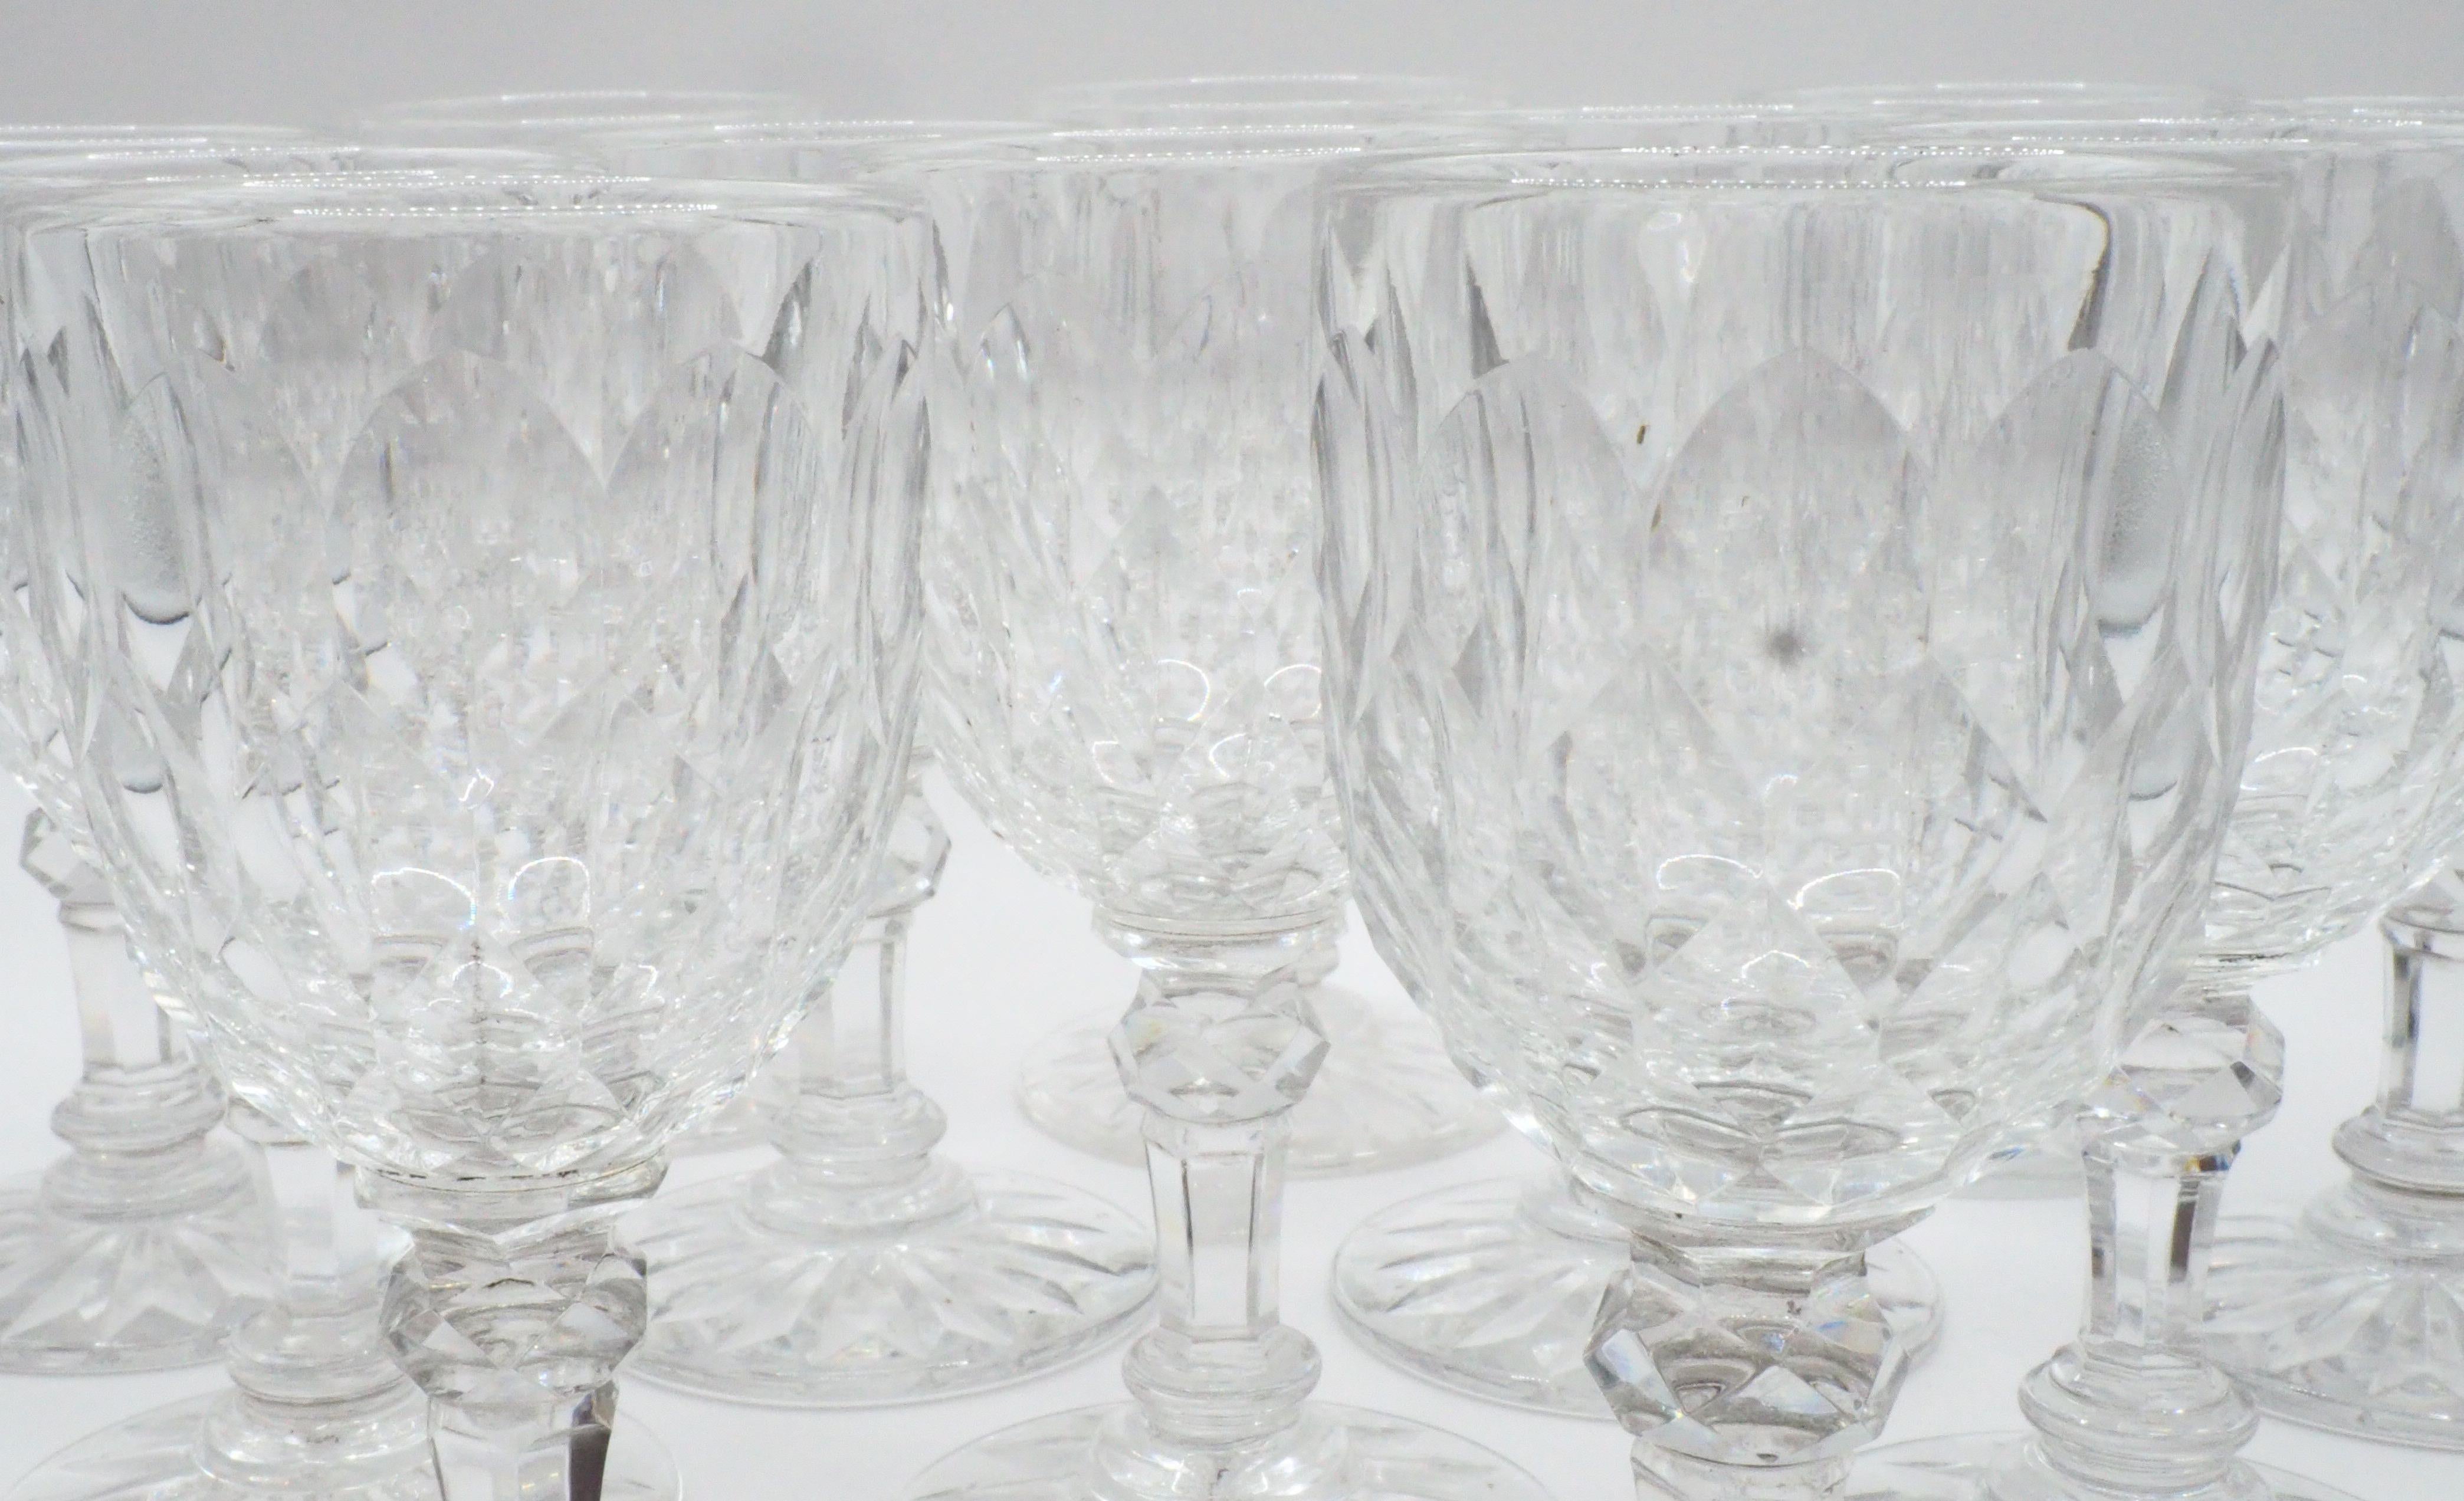 French Baccarat crystal liquor set, 12 pieces service - Juvisy pattern - Elysee Palace